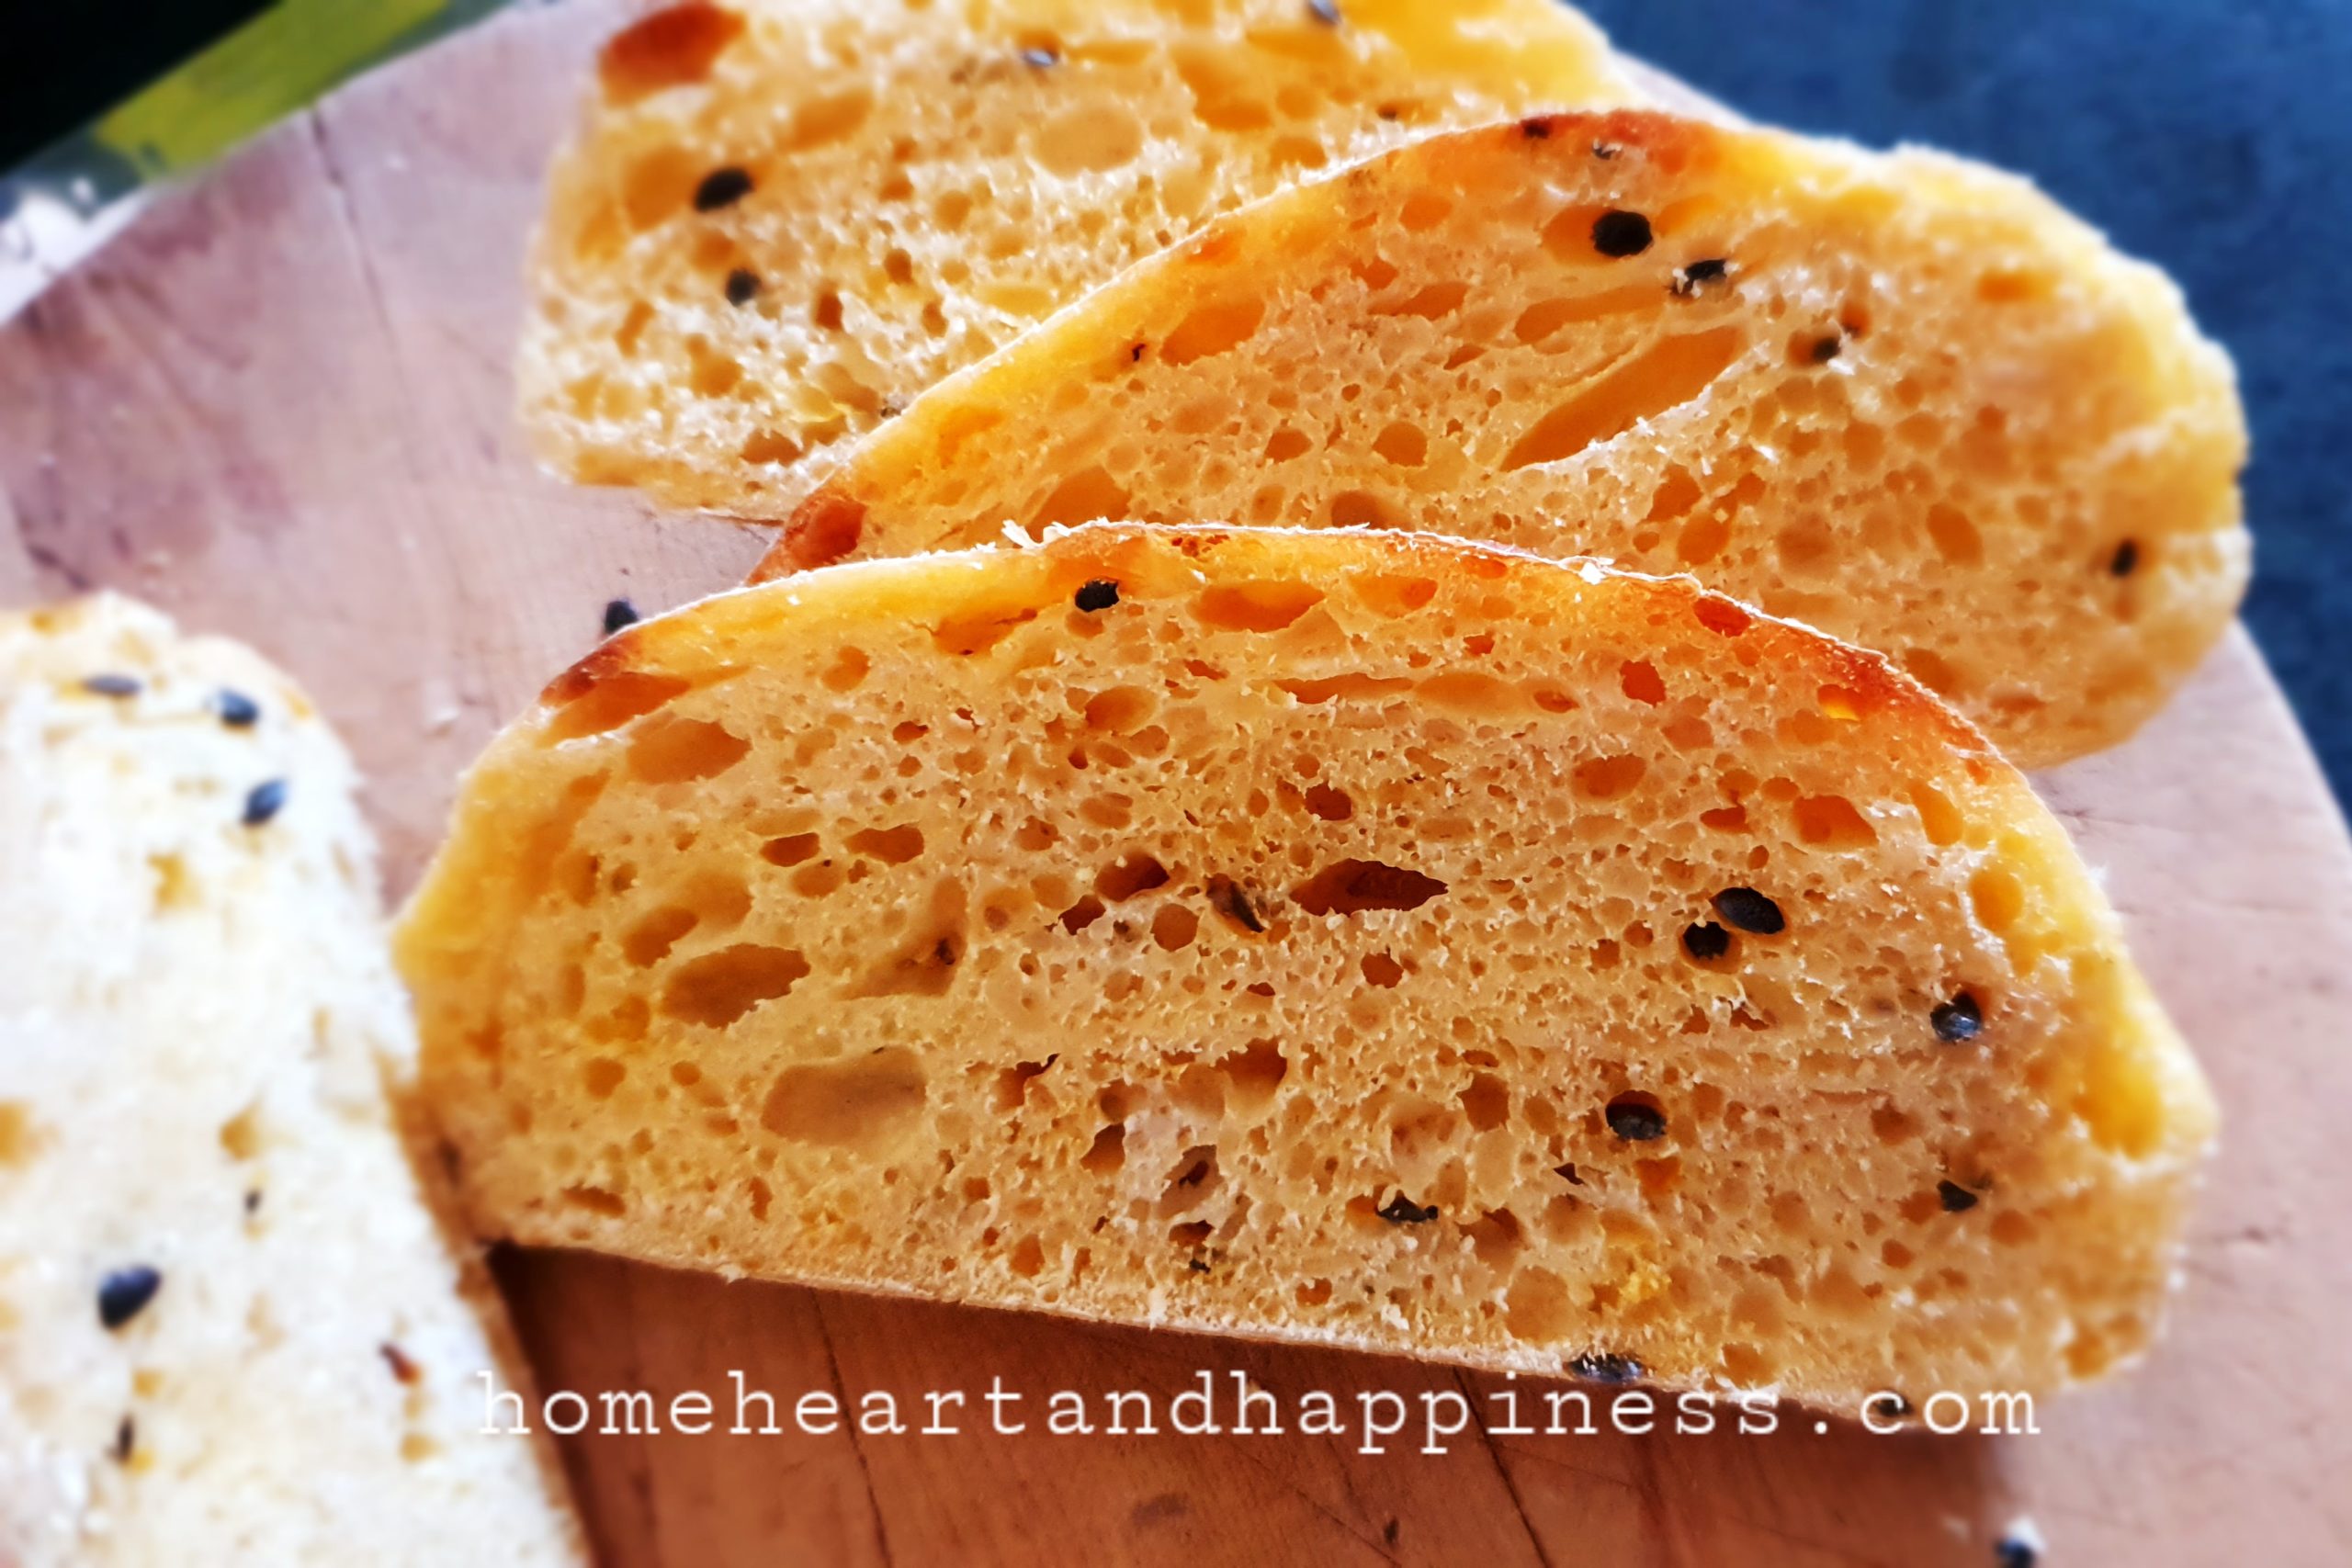 Passionate Passion fruit Sourdough. Subscriber only recipe